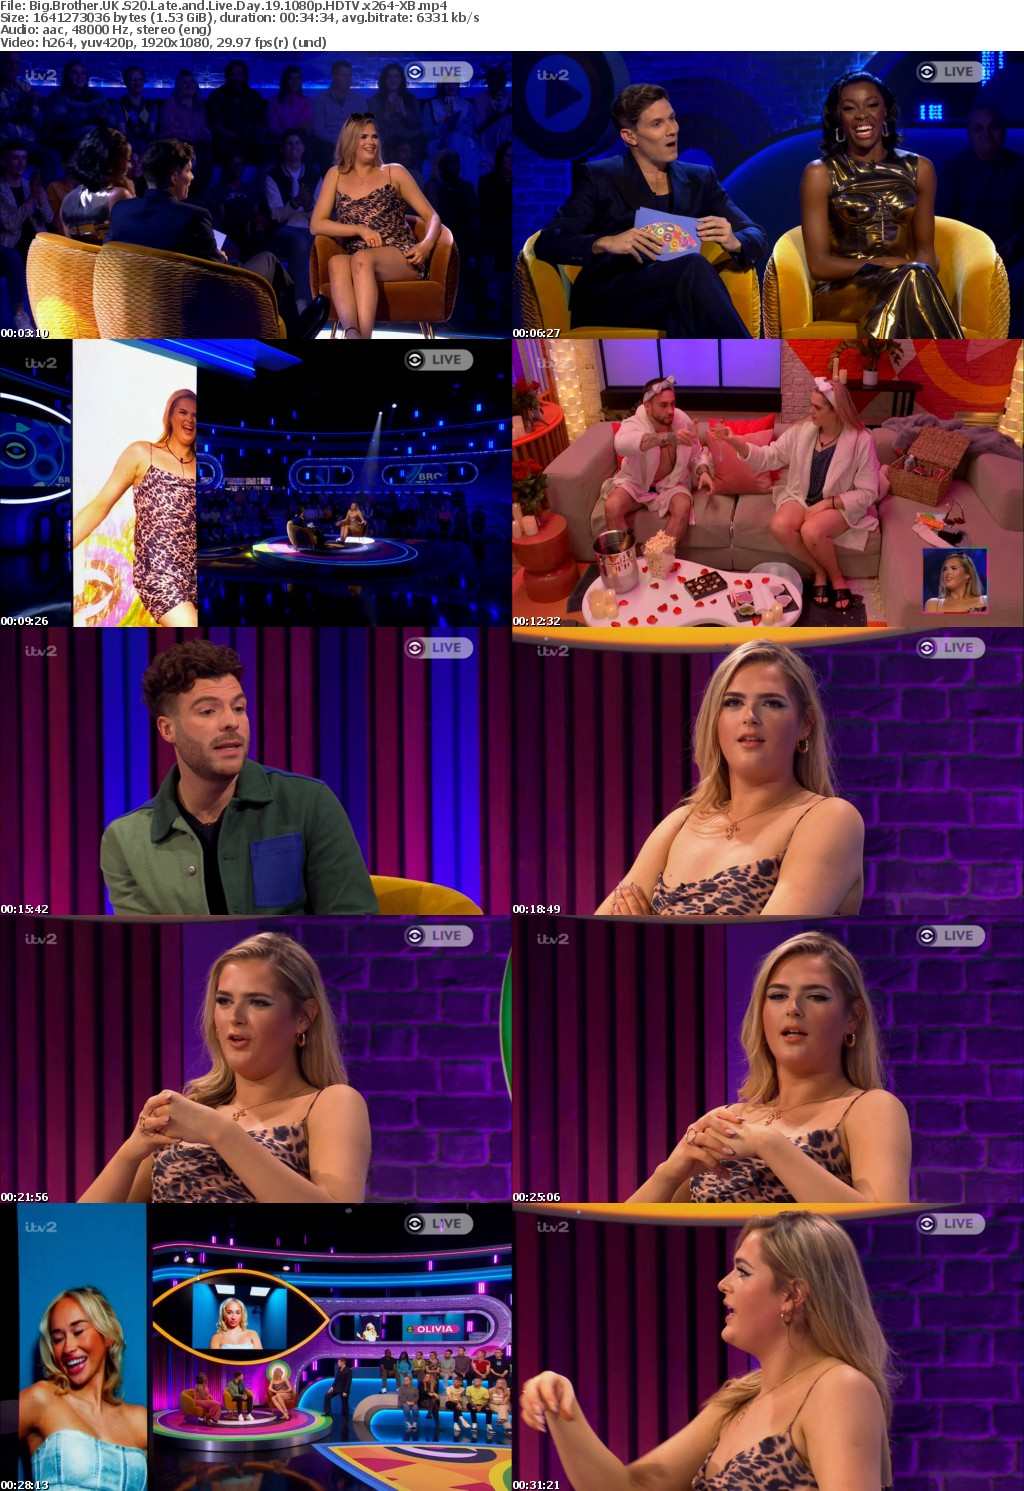 Big Brother UK S20 Late and Live Day 19 1080p HDTV x264-XB